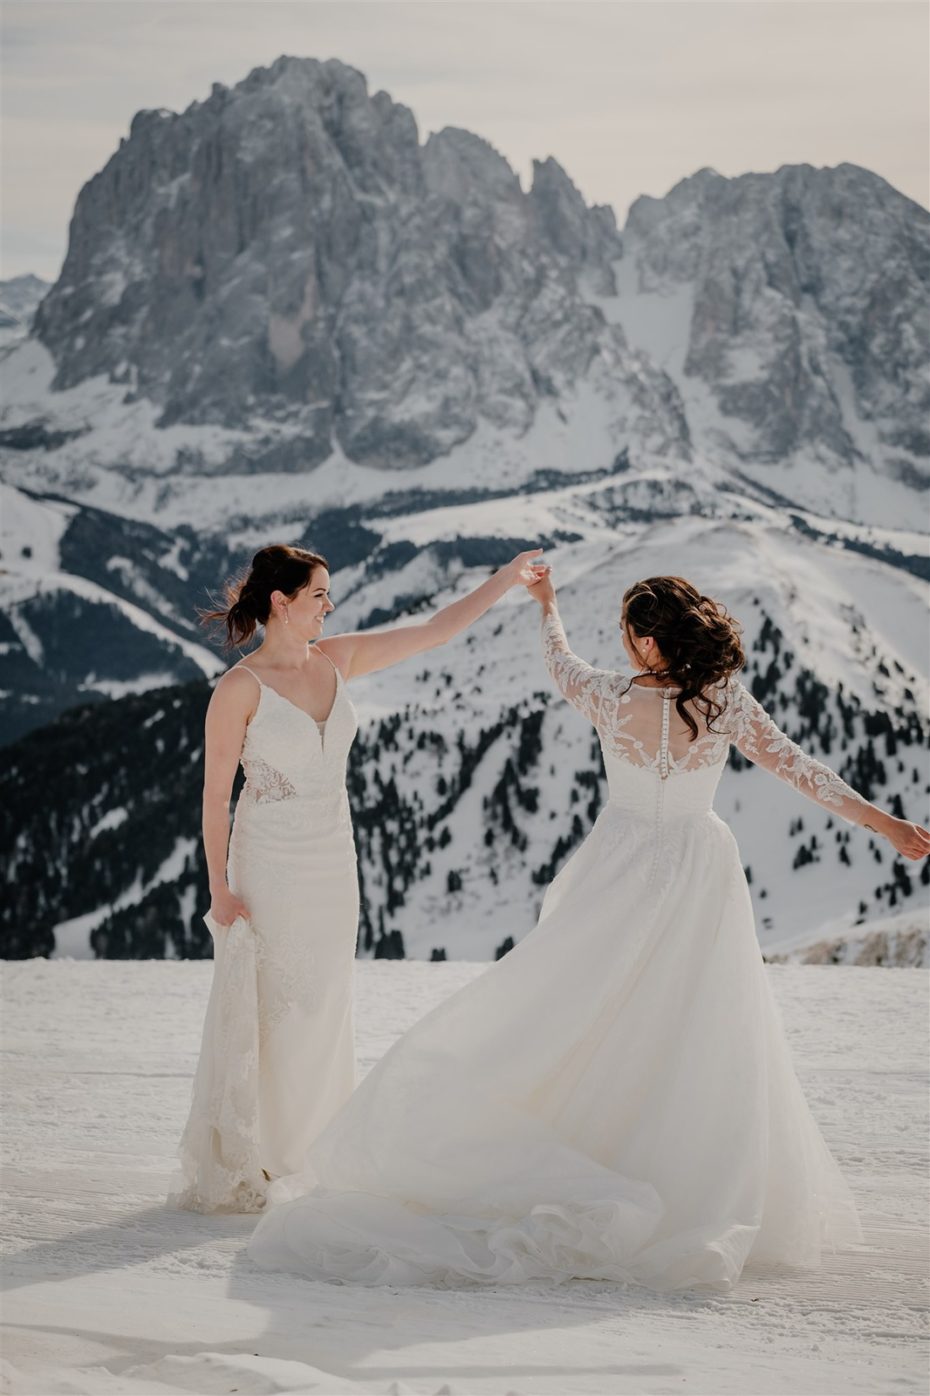 Lesbian brides dance in the snow in the Dolomite mountains in Italy